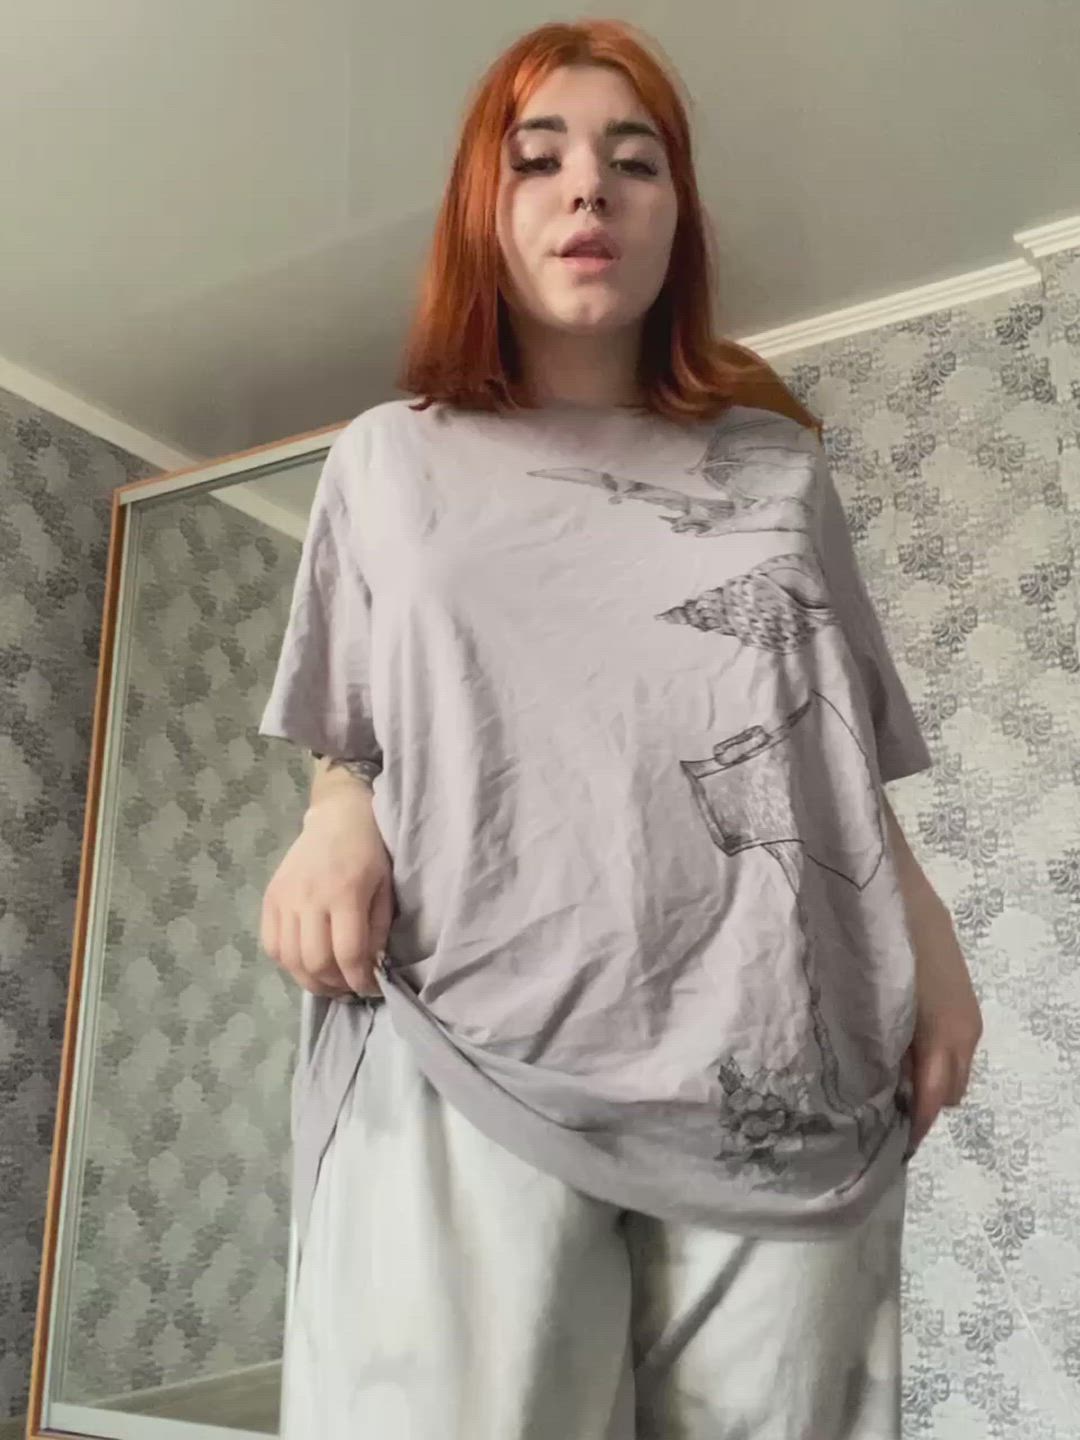 Amateur porn video with onlyfans model victoriavikki <strong>@victoriayourgf</strong>